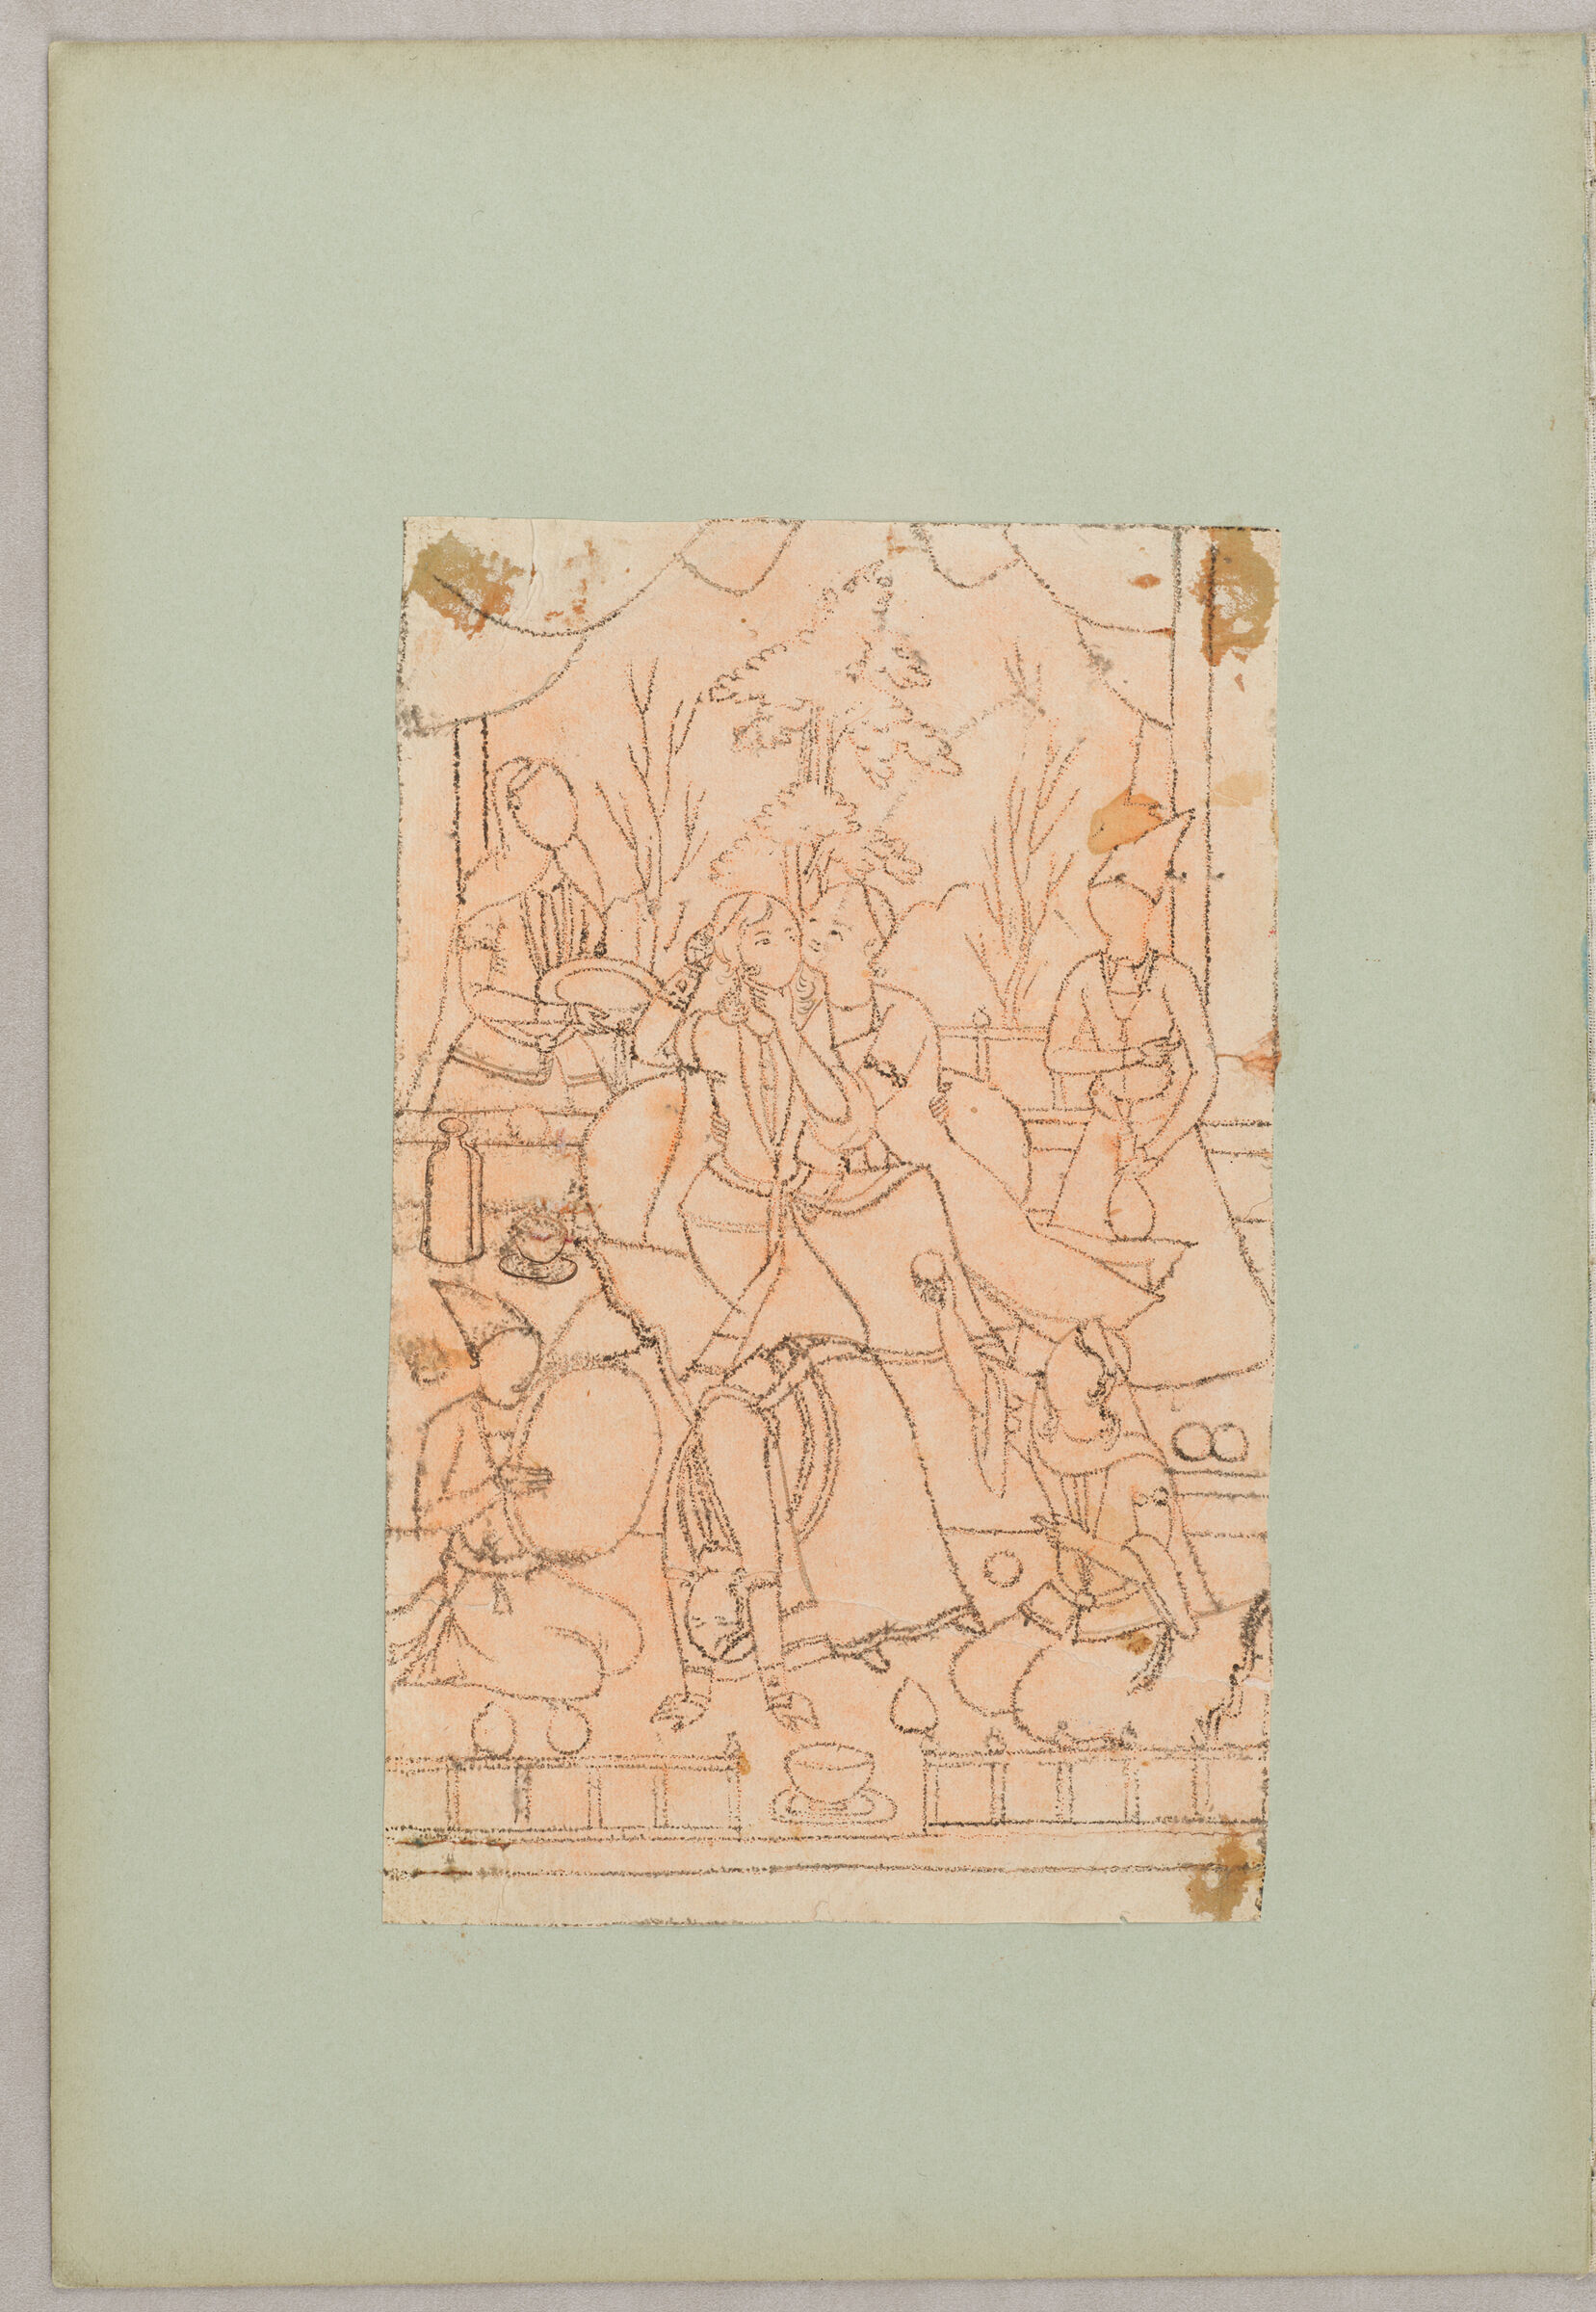 Folio 7 From An Album Of Artists' Drawings From Qajar Iran: Embracing Couple On Terrace, Attended By Servants, Dancers, And Musicians (Recto); Standing Woman With Headscarf (Verso)